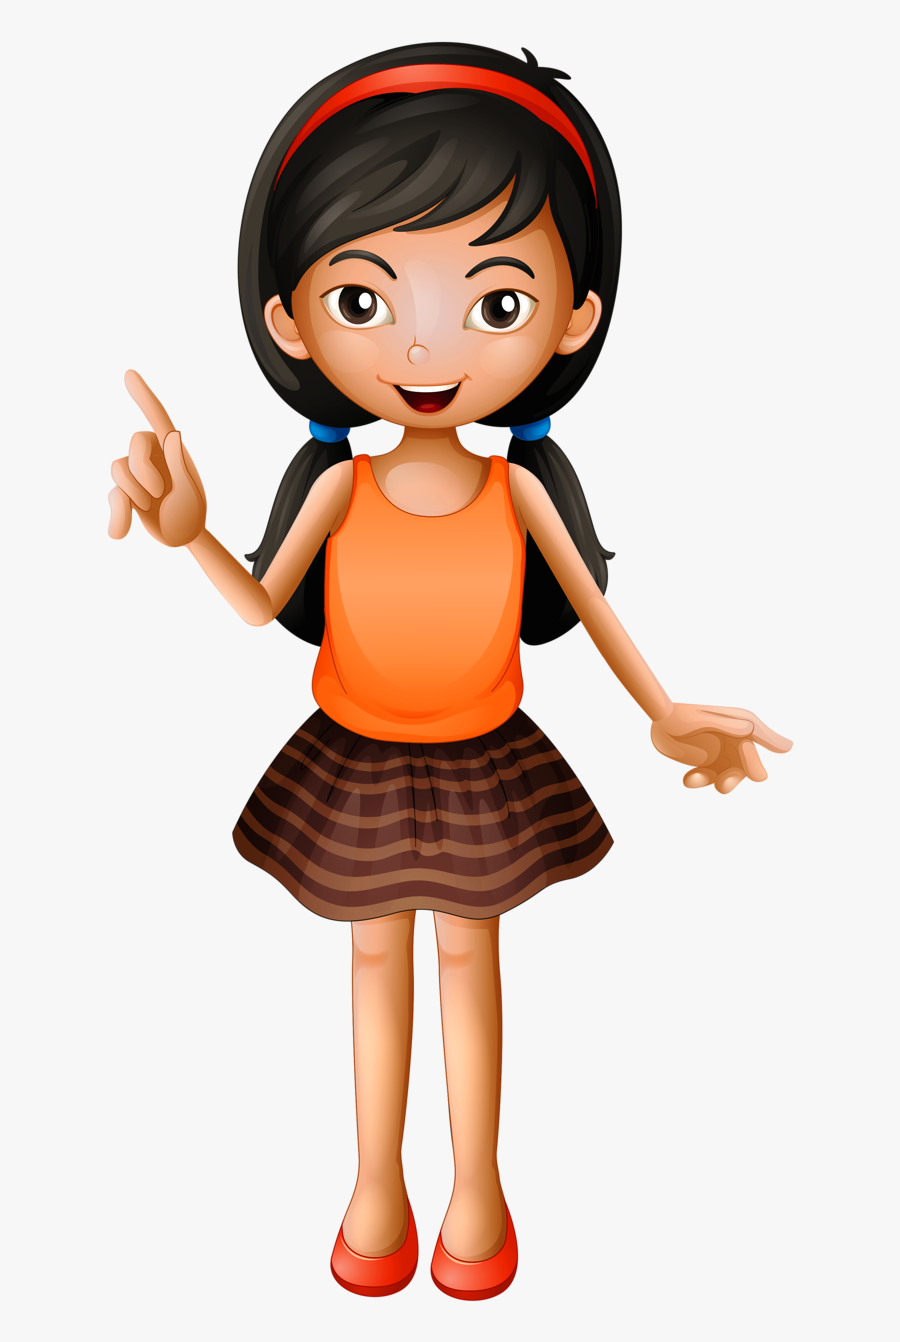 Girl Speaking Clip Art , Free Transparent Clipart - ClipartKey